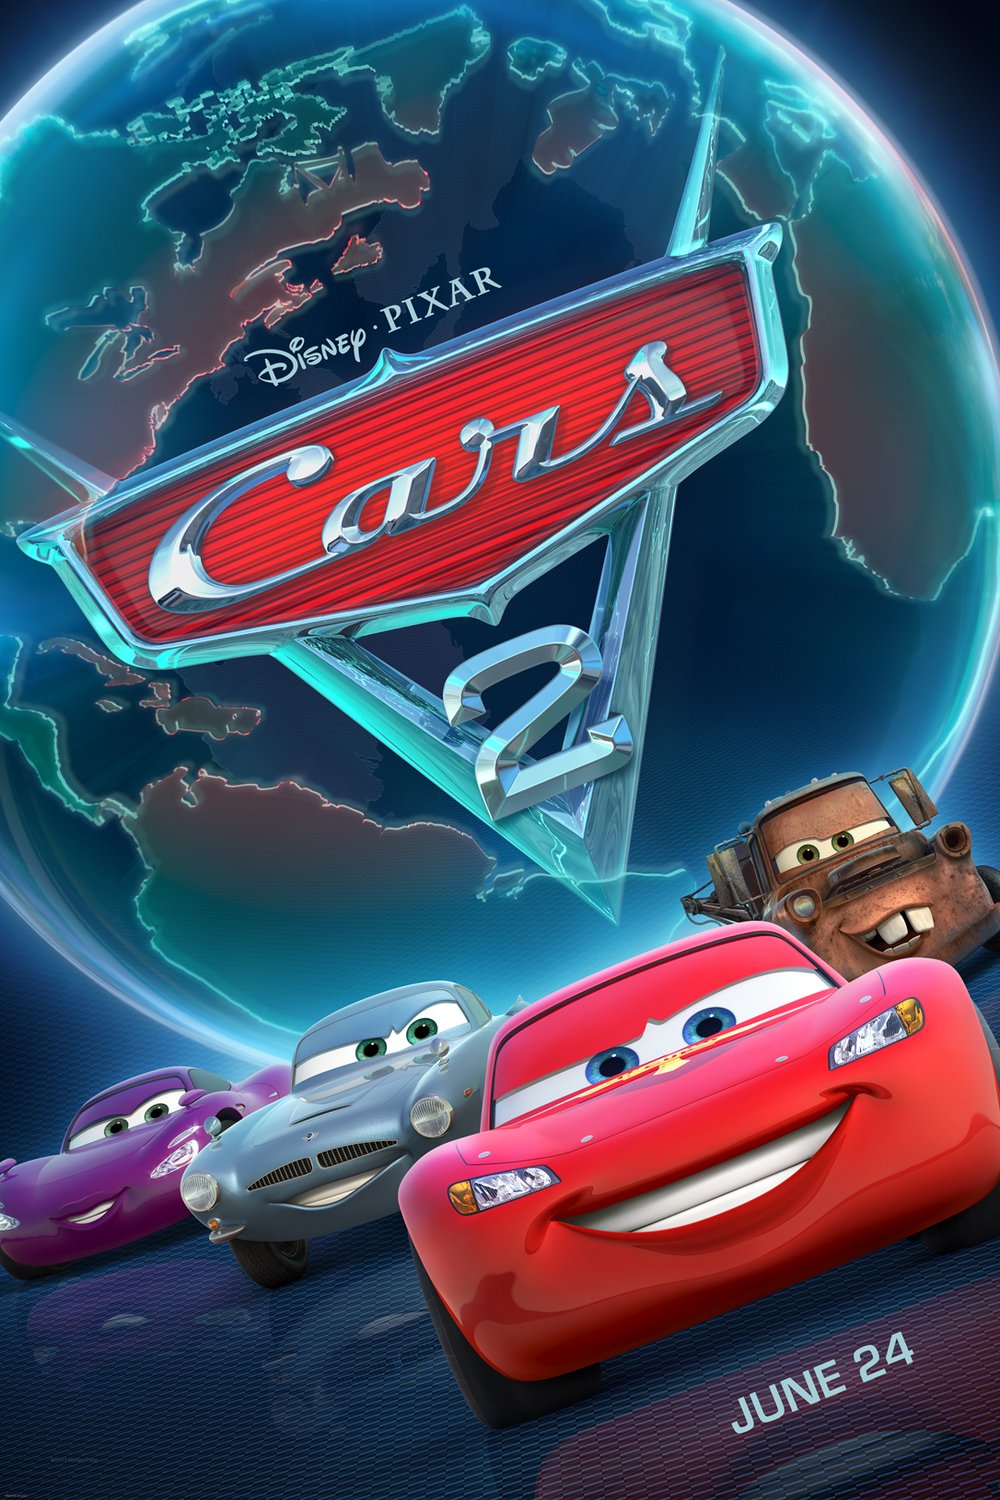 Poster of the movie Cars 2